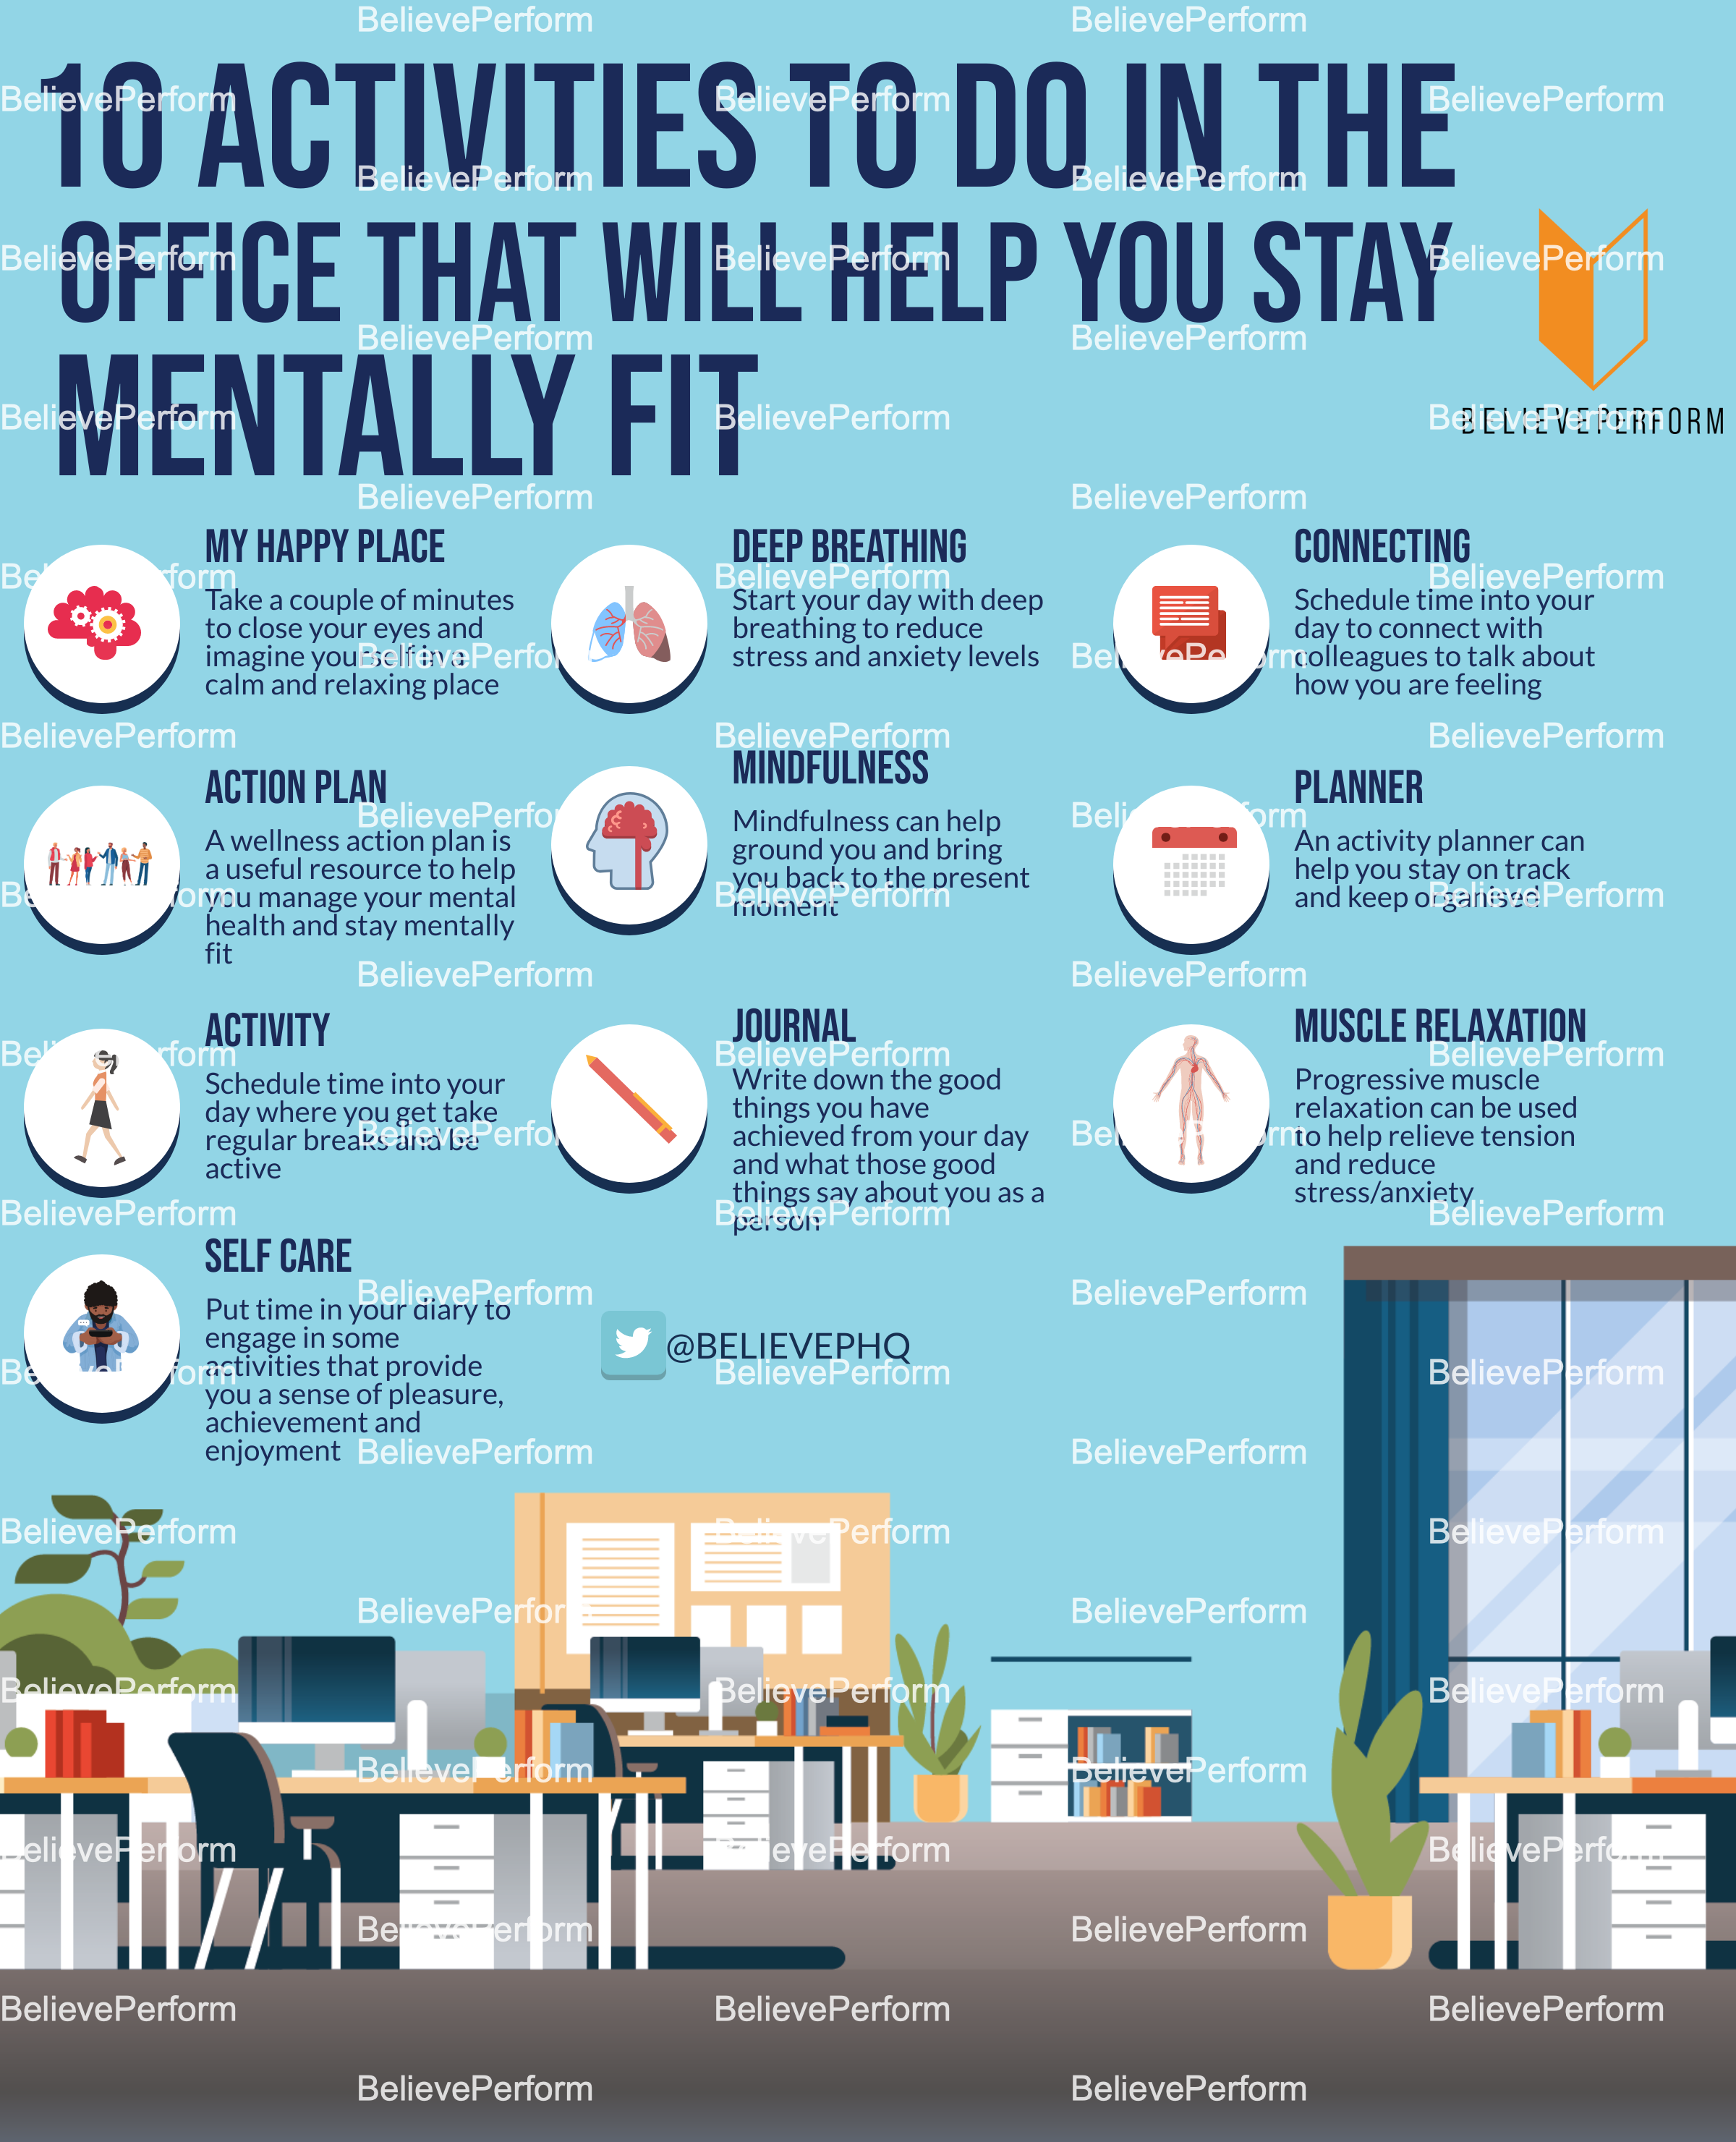 10 activities to do in the office that will help you stay mentally fit -  BelievePerform - The UK's leading Sports Psychology Website